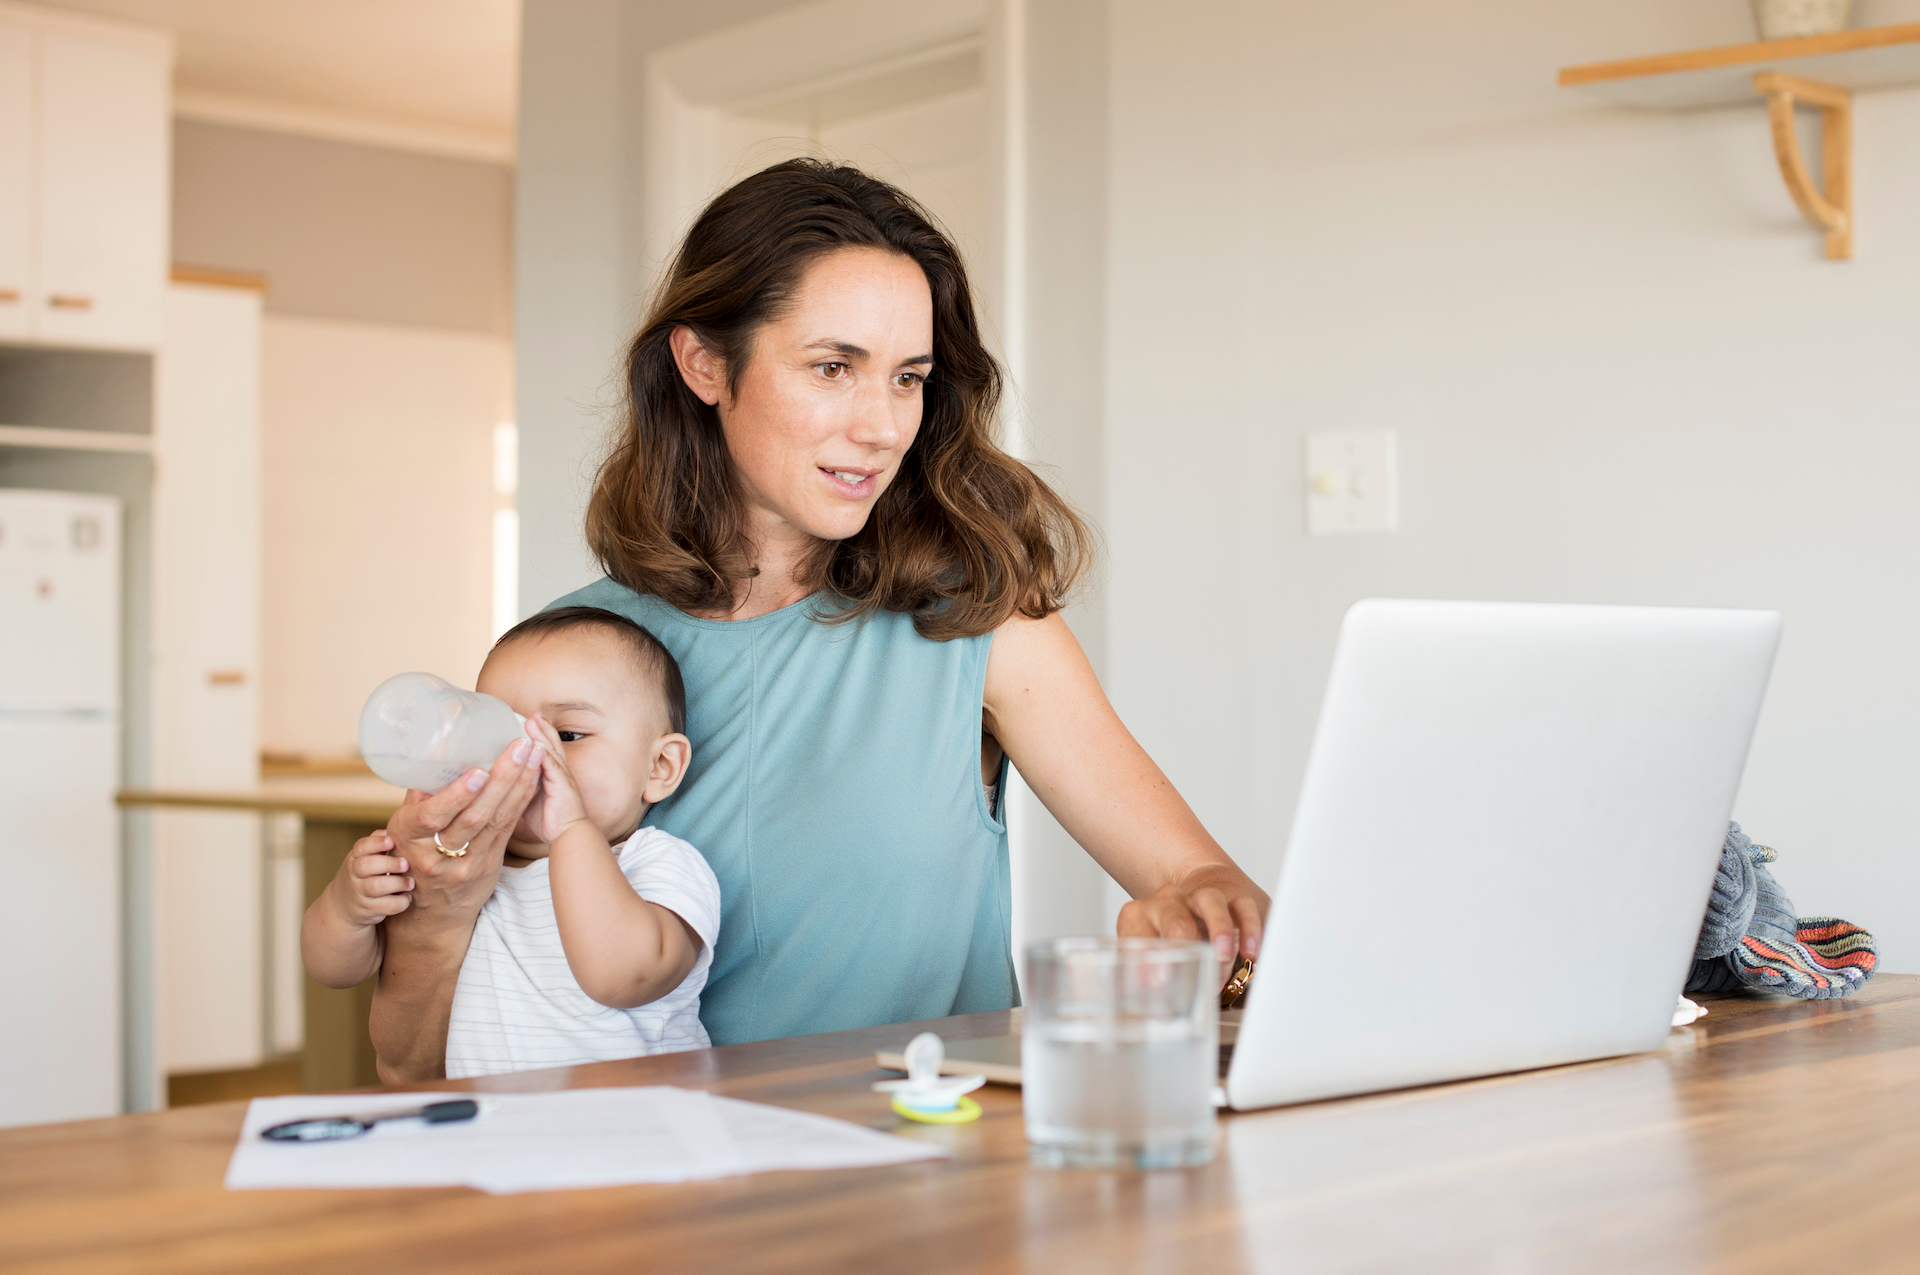 Woman works on a laptop while holding and feeding a baby in her kitchen